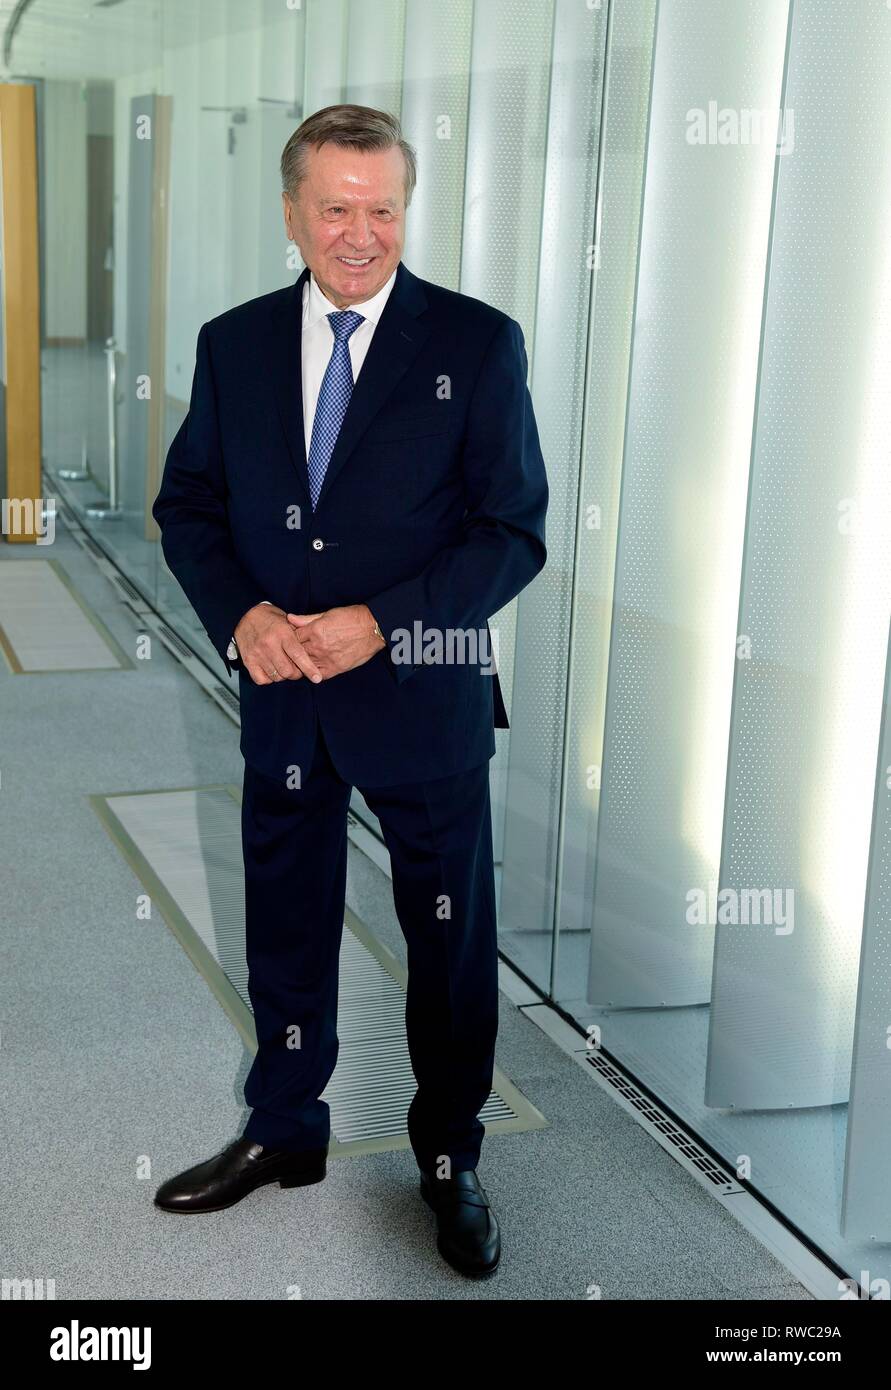 Milan, Italy. 05th Mar, 2019. Milan, Viktor Alekseevic Zubkov. President of "Gazprom", the main Russian oil company Credit: Independent Photo Agency/Alamy Live News Stock Photo